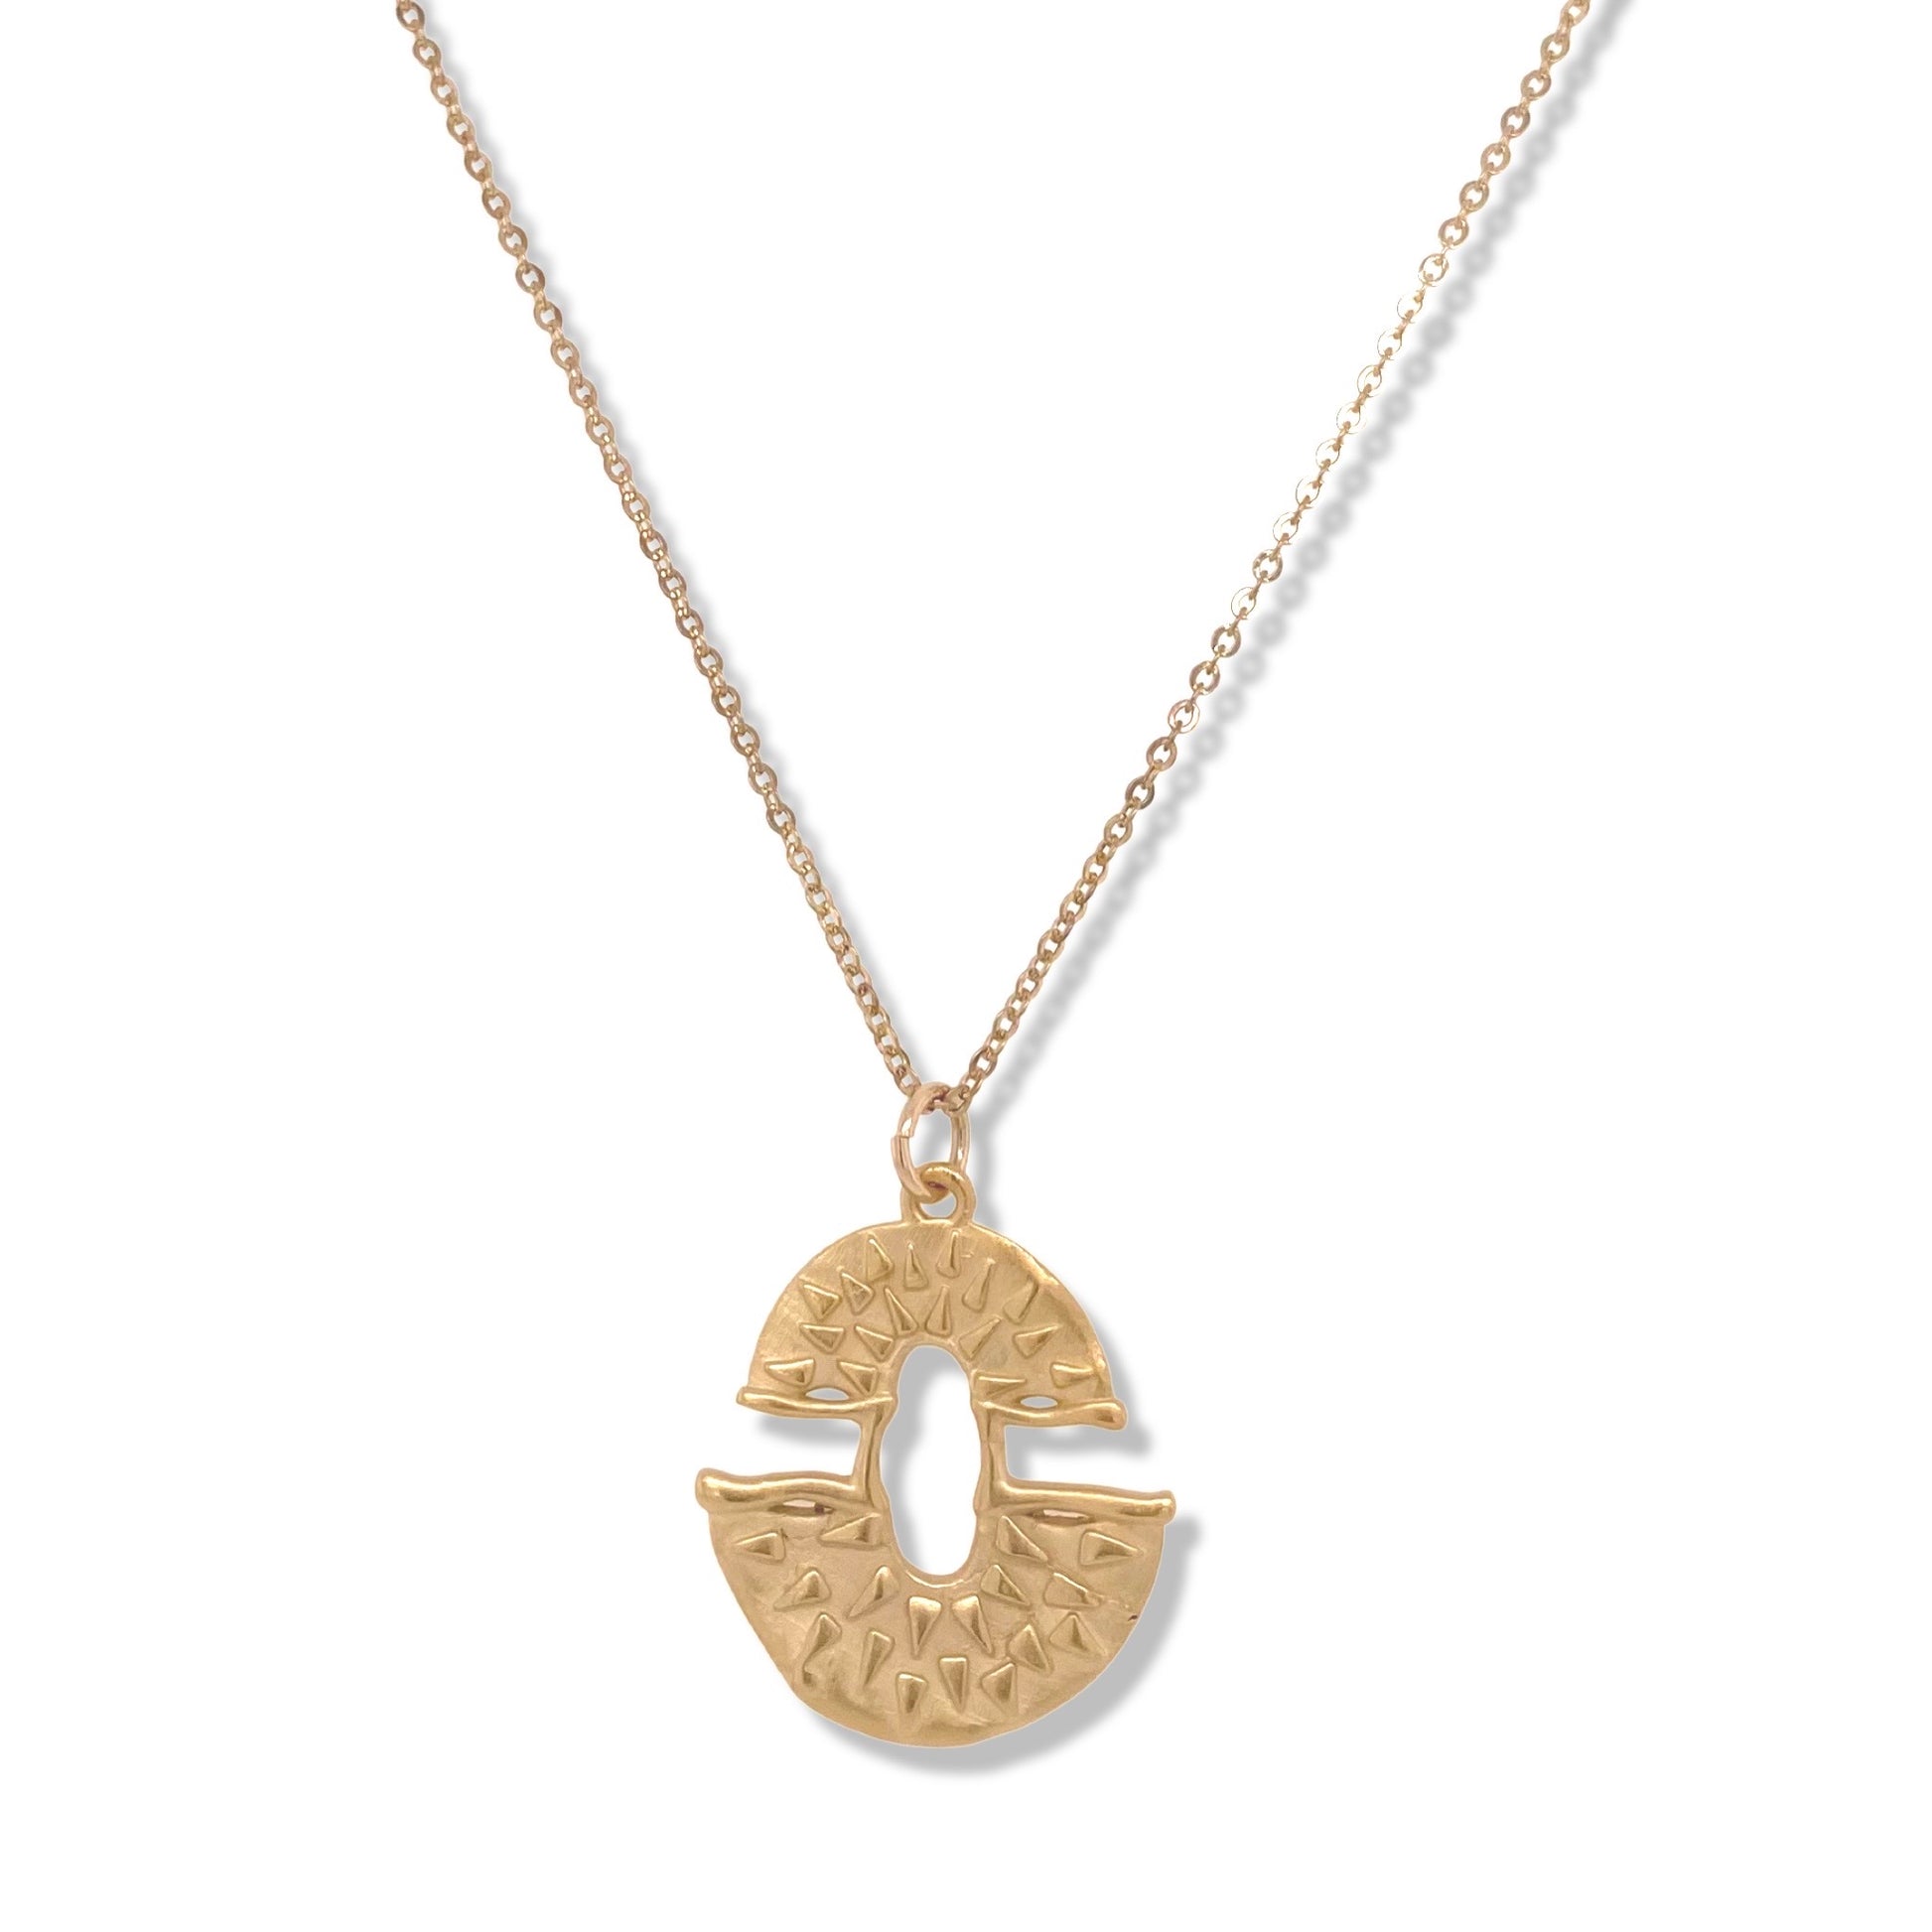 Orion Necklace in Gold by Keely Smith Jewelry Designs